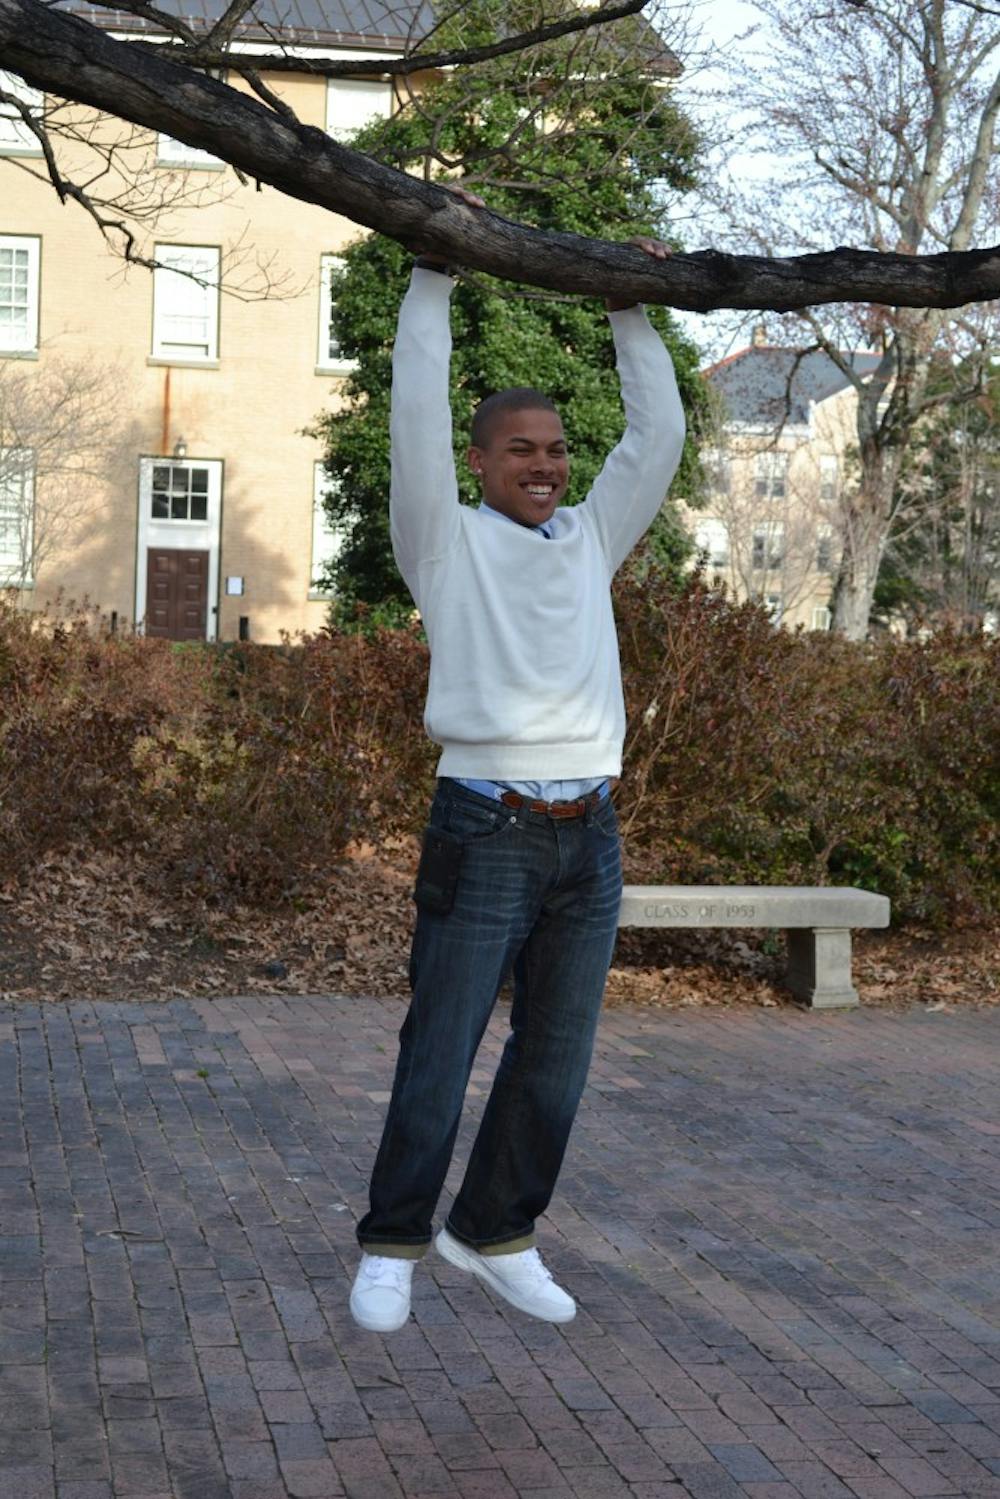 	Calvin Lewis Jr. &#8220;hangs out&#8221; near the Old Well.